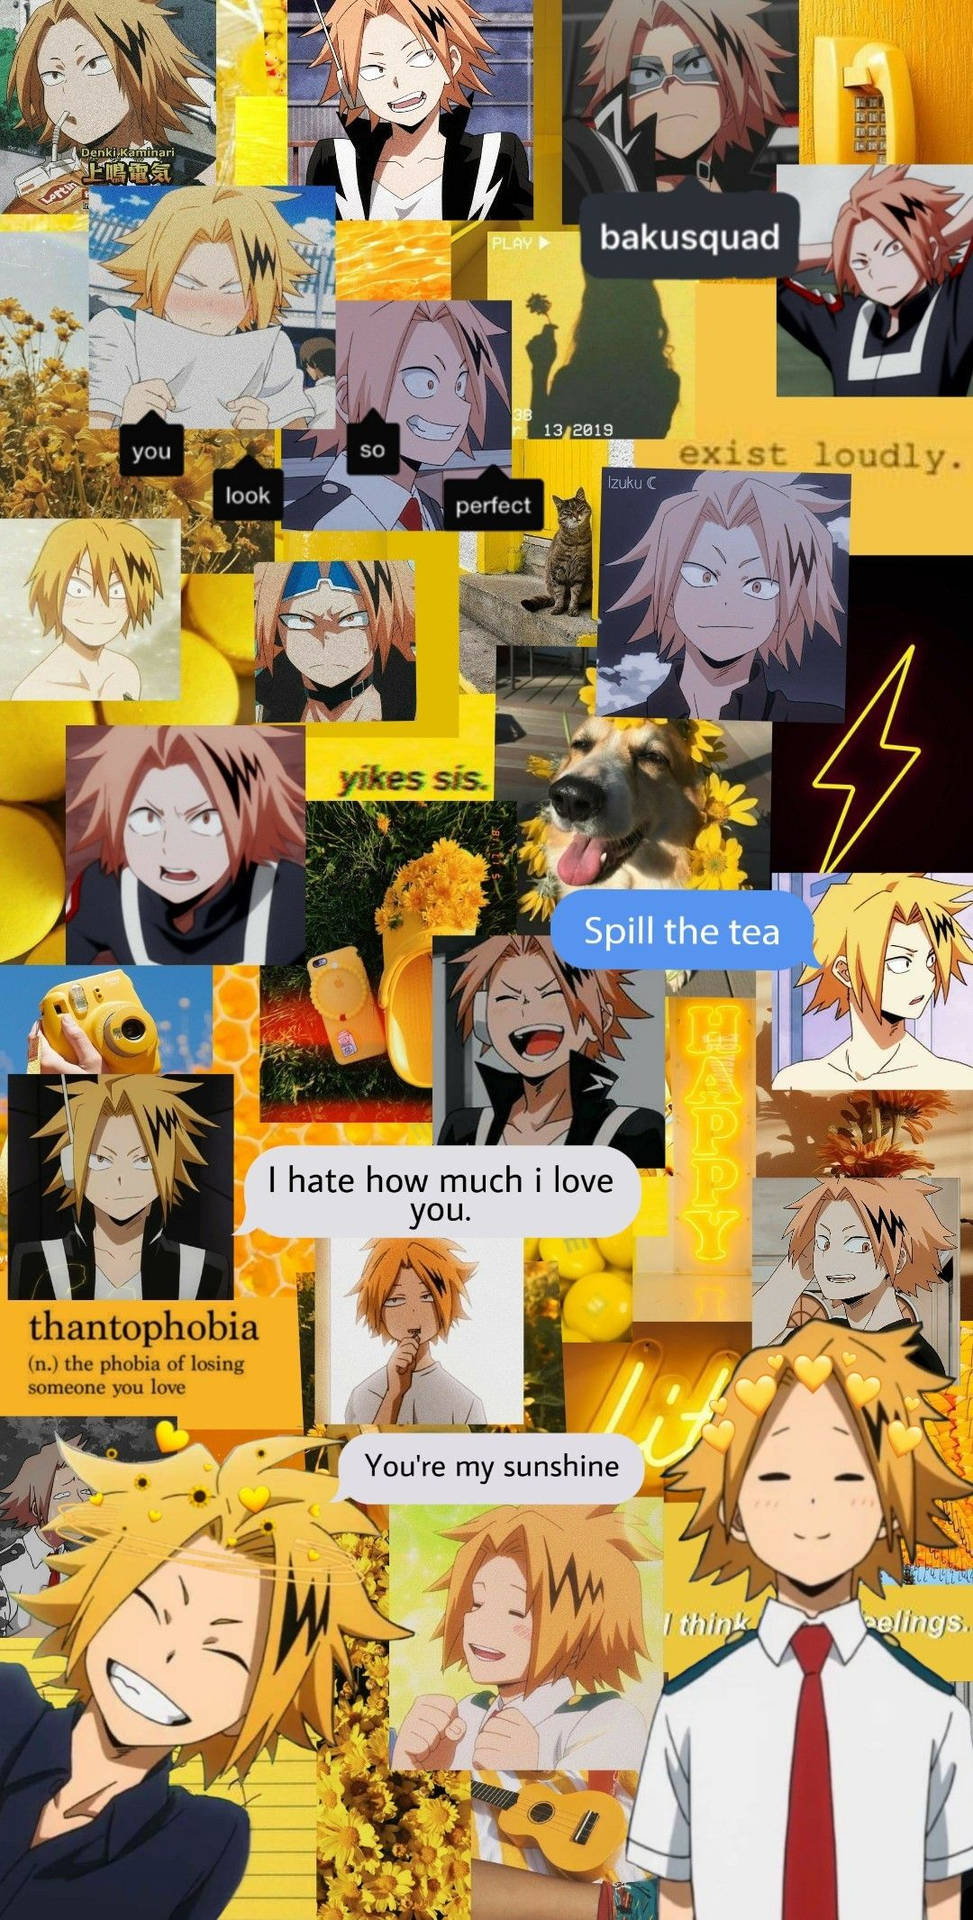 Charming and Playful - the Lovable Denki Wallpaper